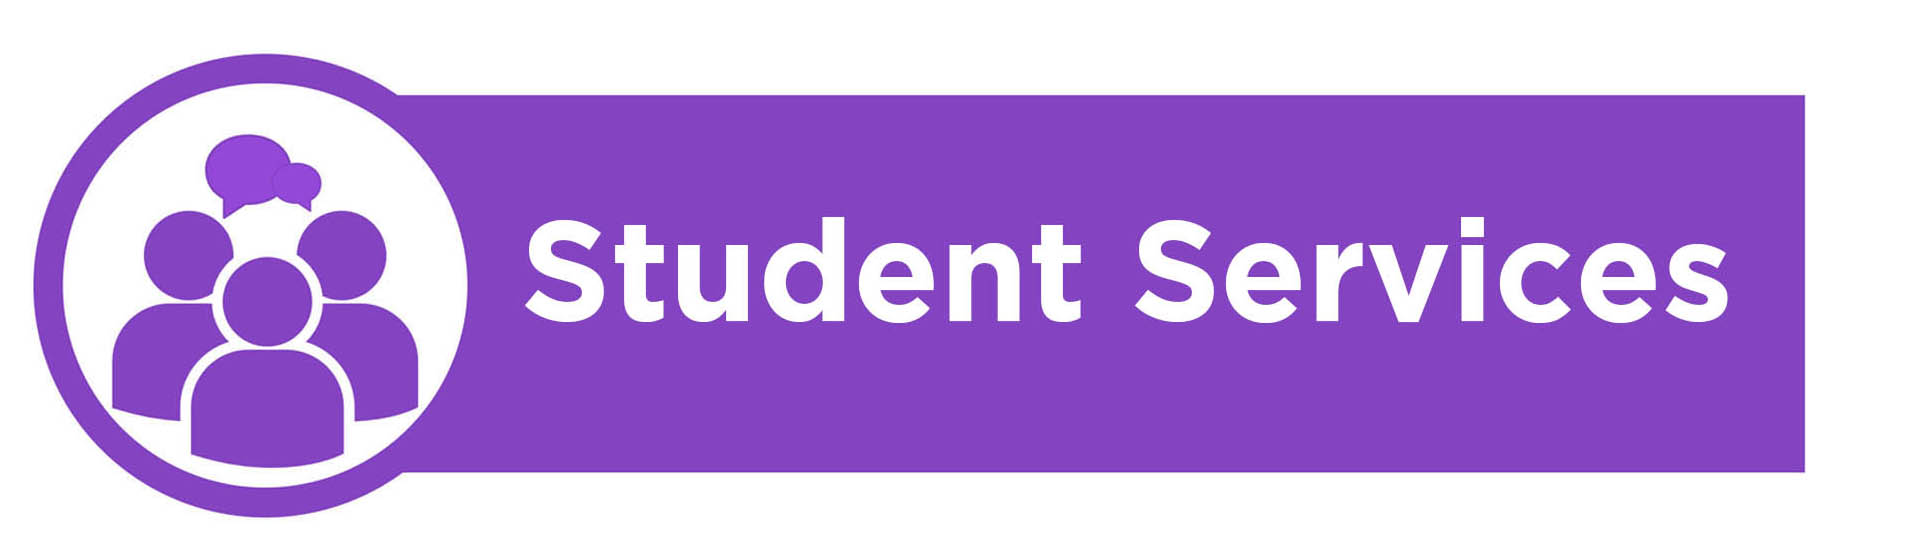 Banner image containing the text 'Student Services'